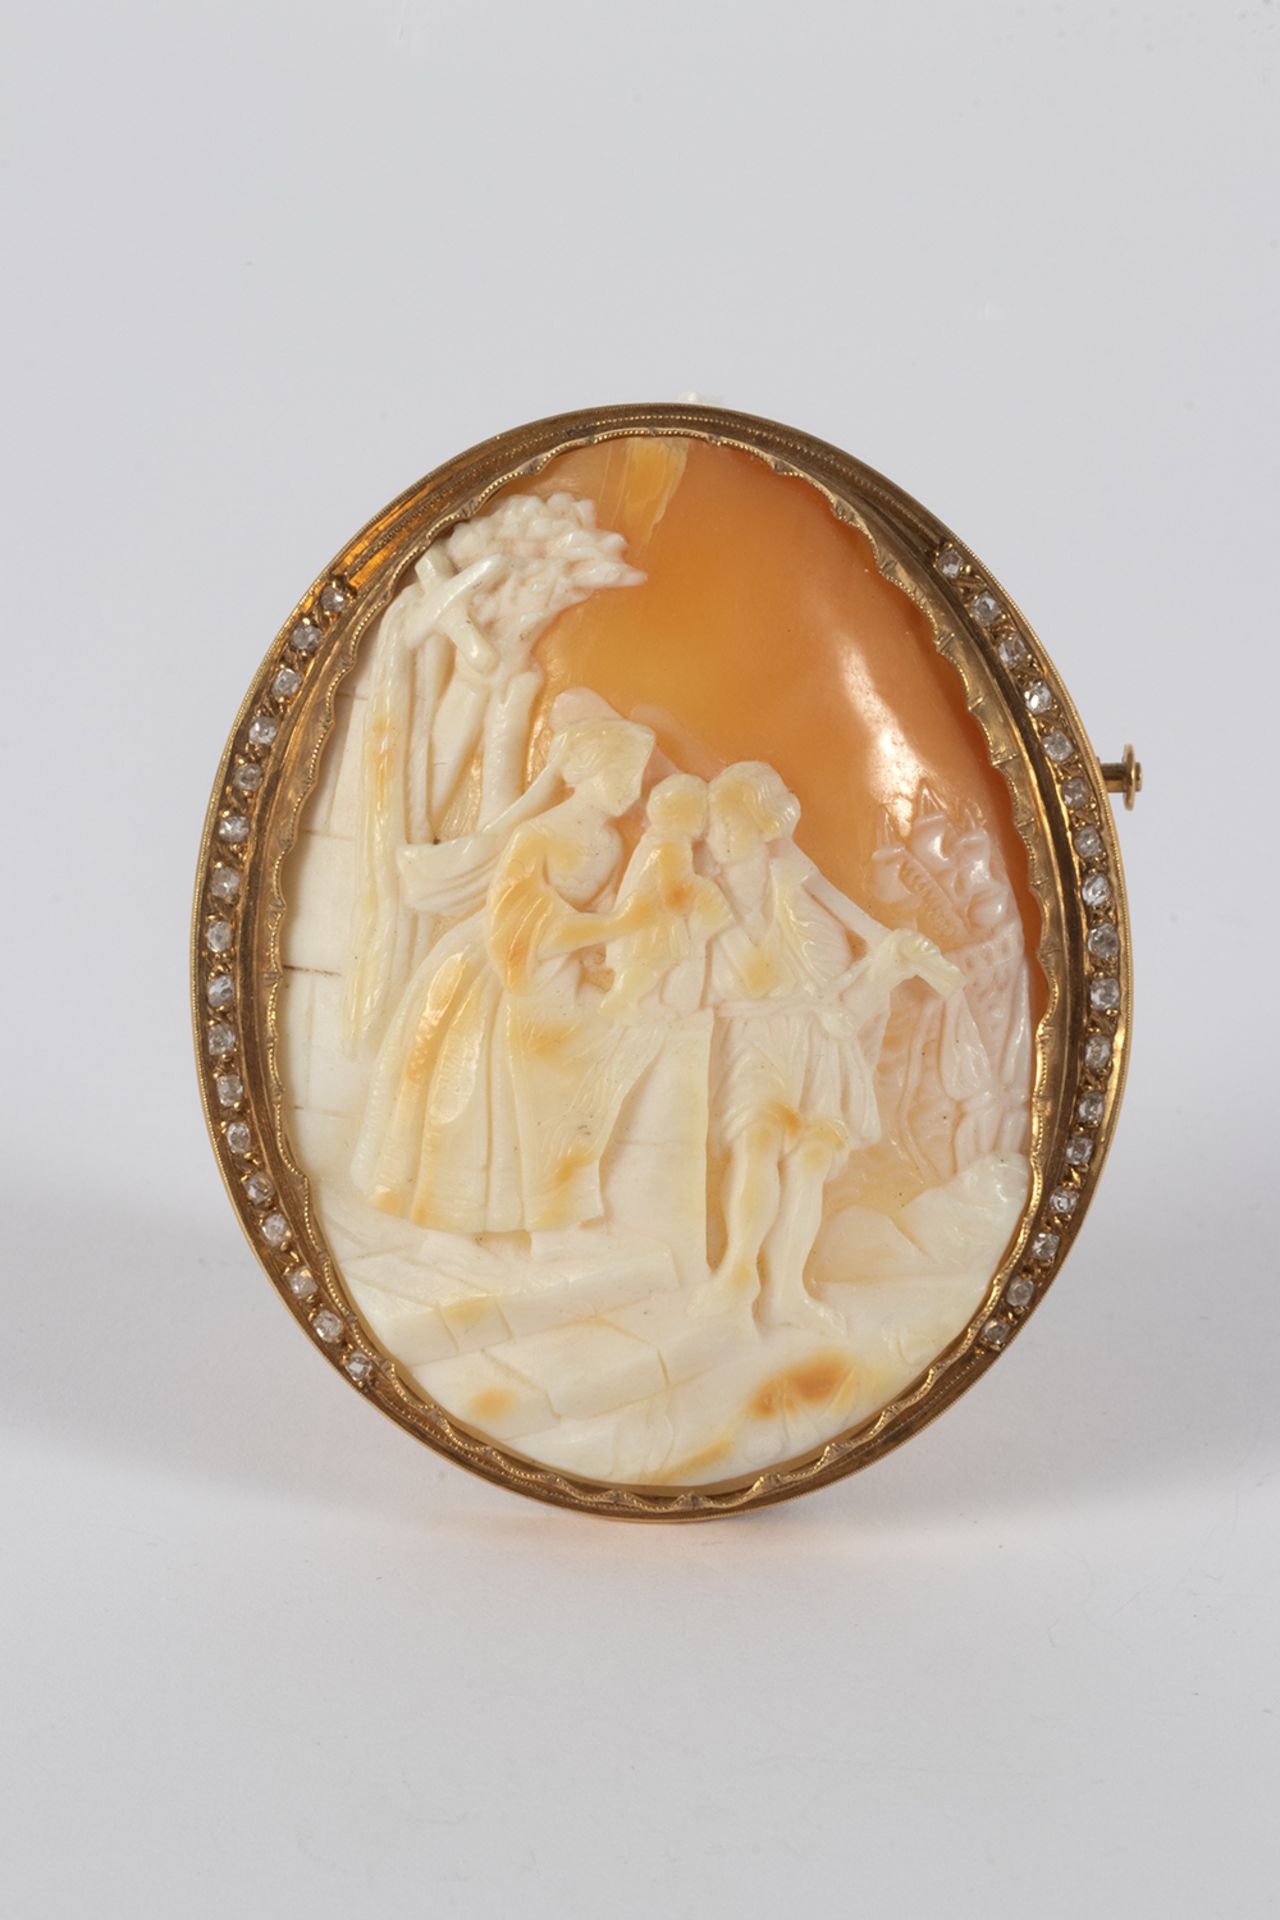 Cameo brooch pendant in gold and rose cut diamonds.